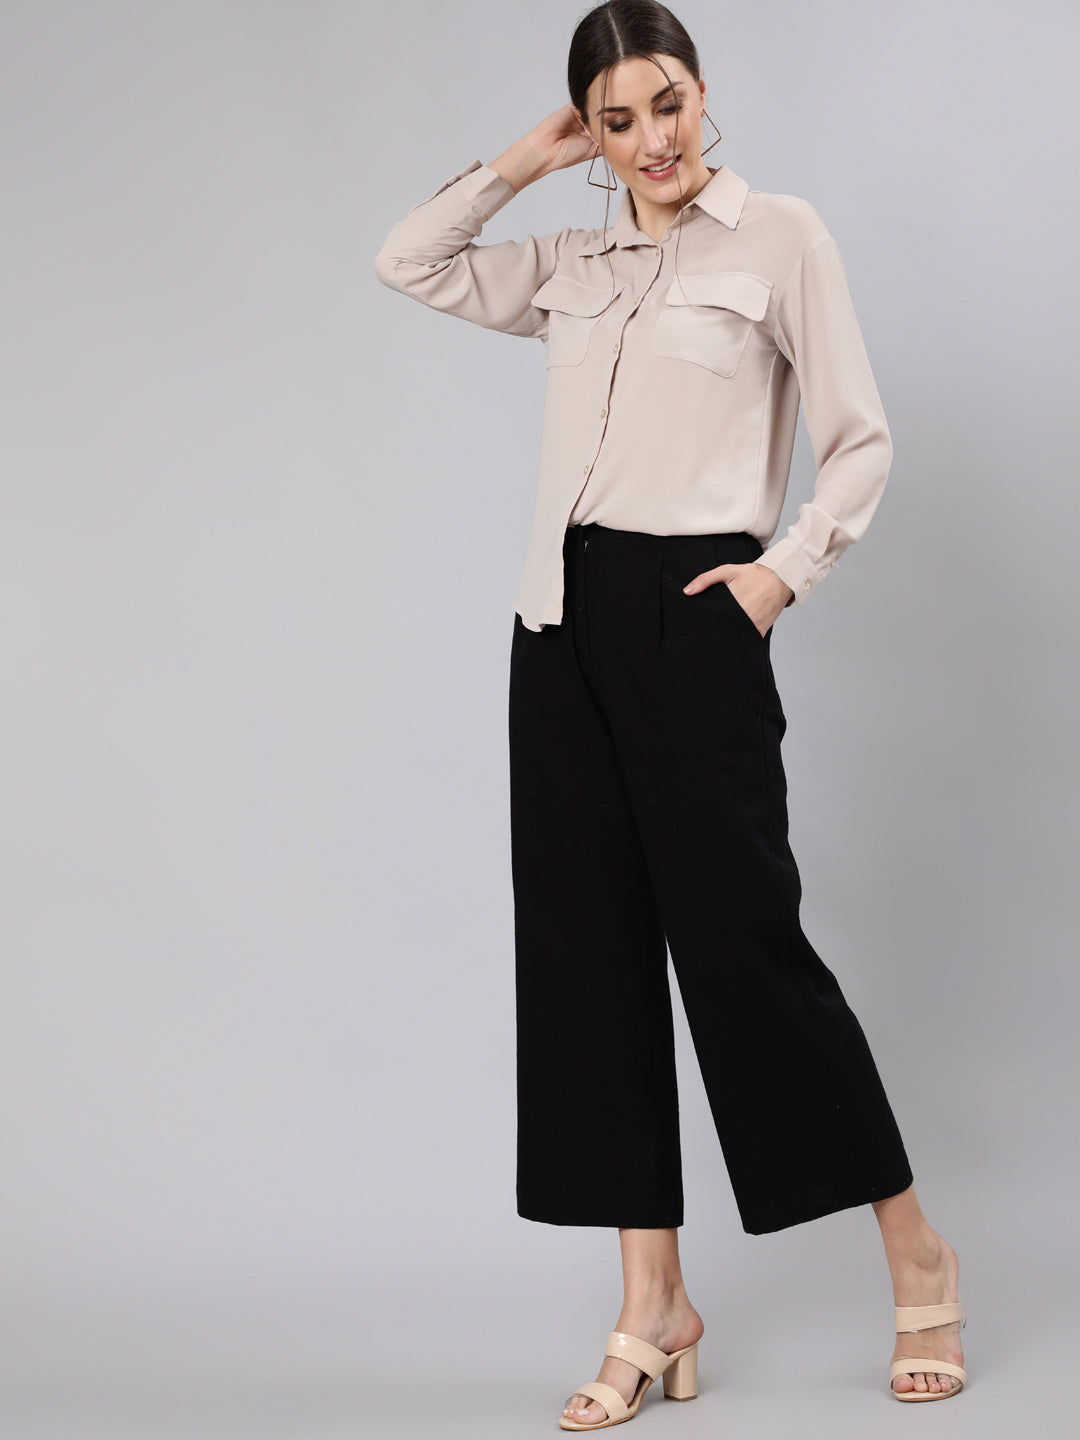 Designer High Waisted Pants for Women on Sale - FARFETCH